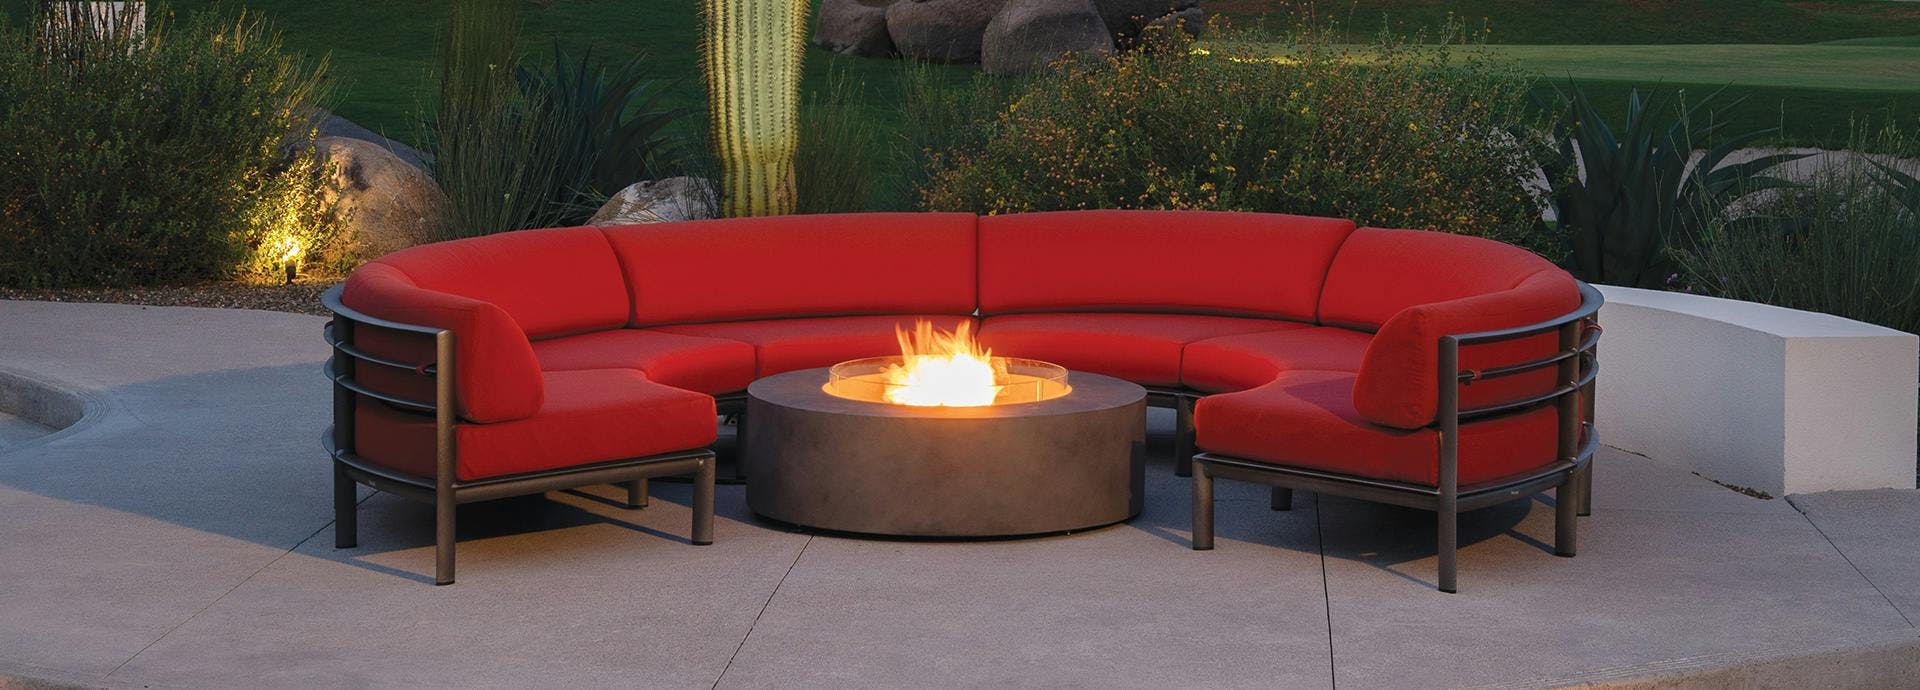 modular sofa with red cushions around a fire table